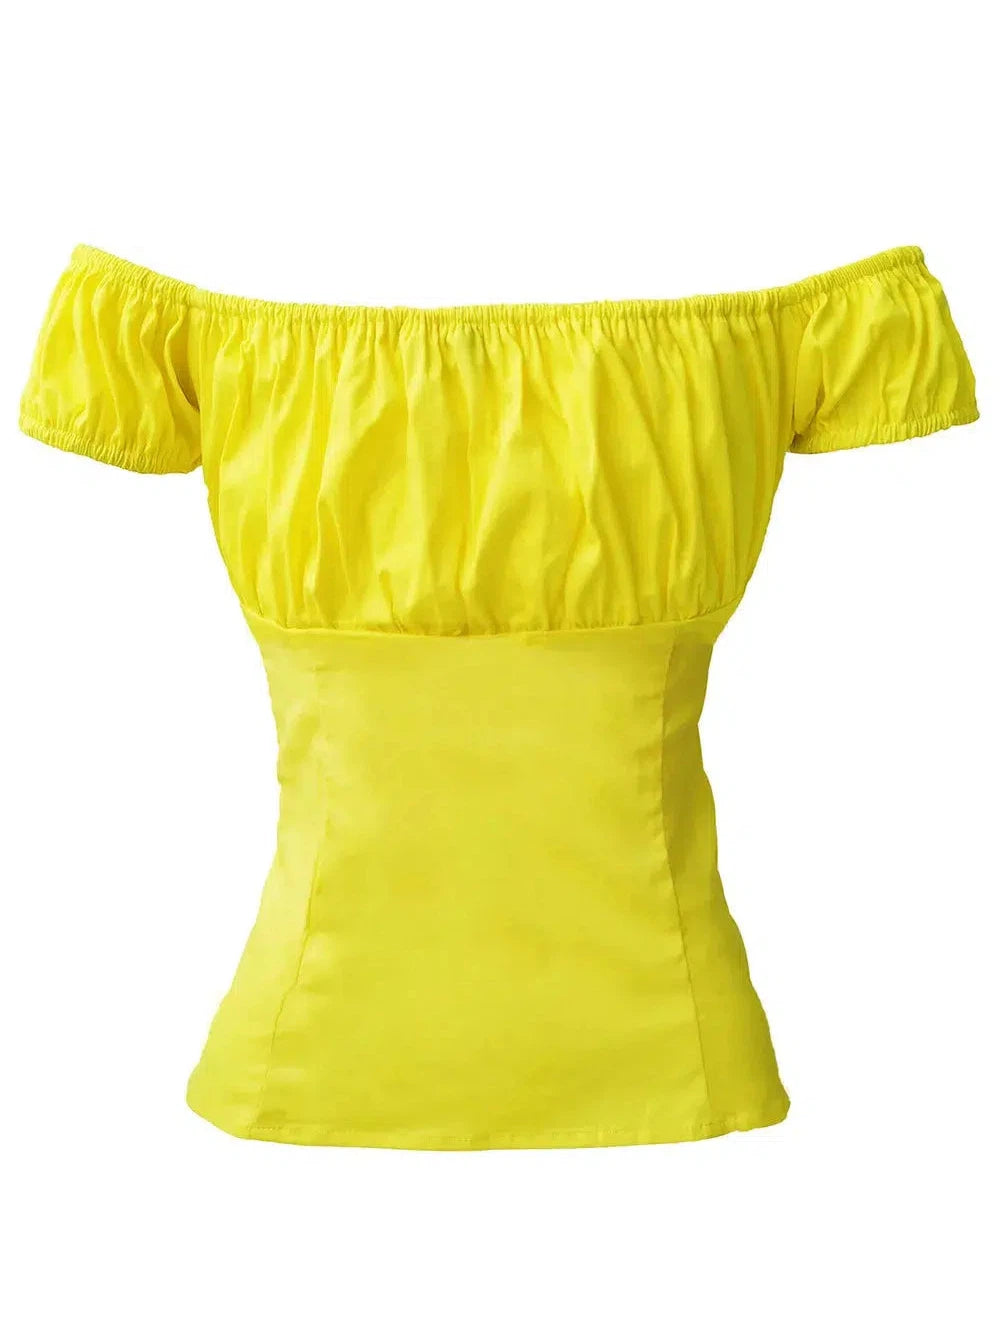 Yellow Peasant Style Top